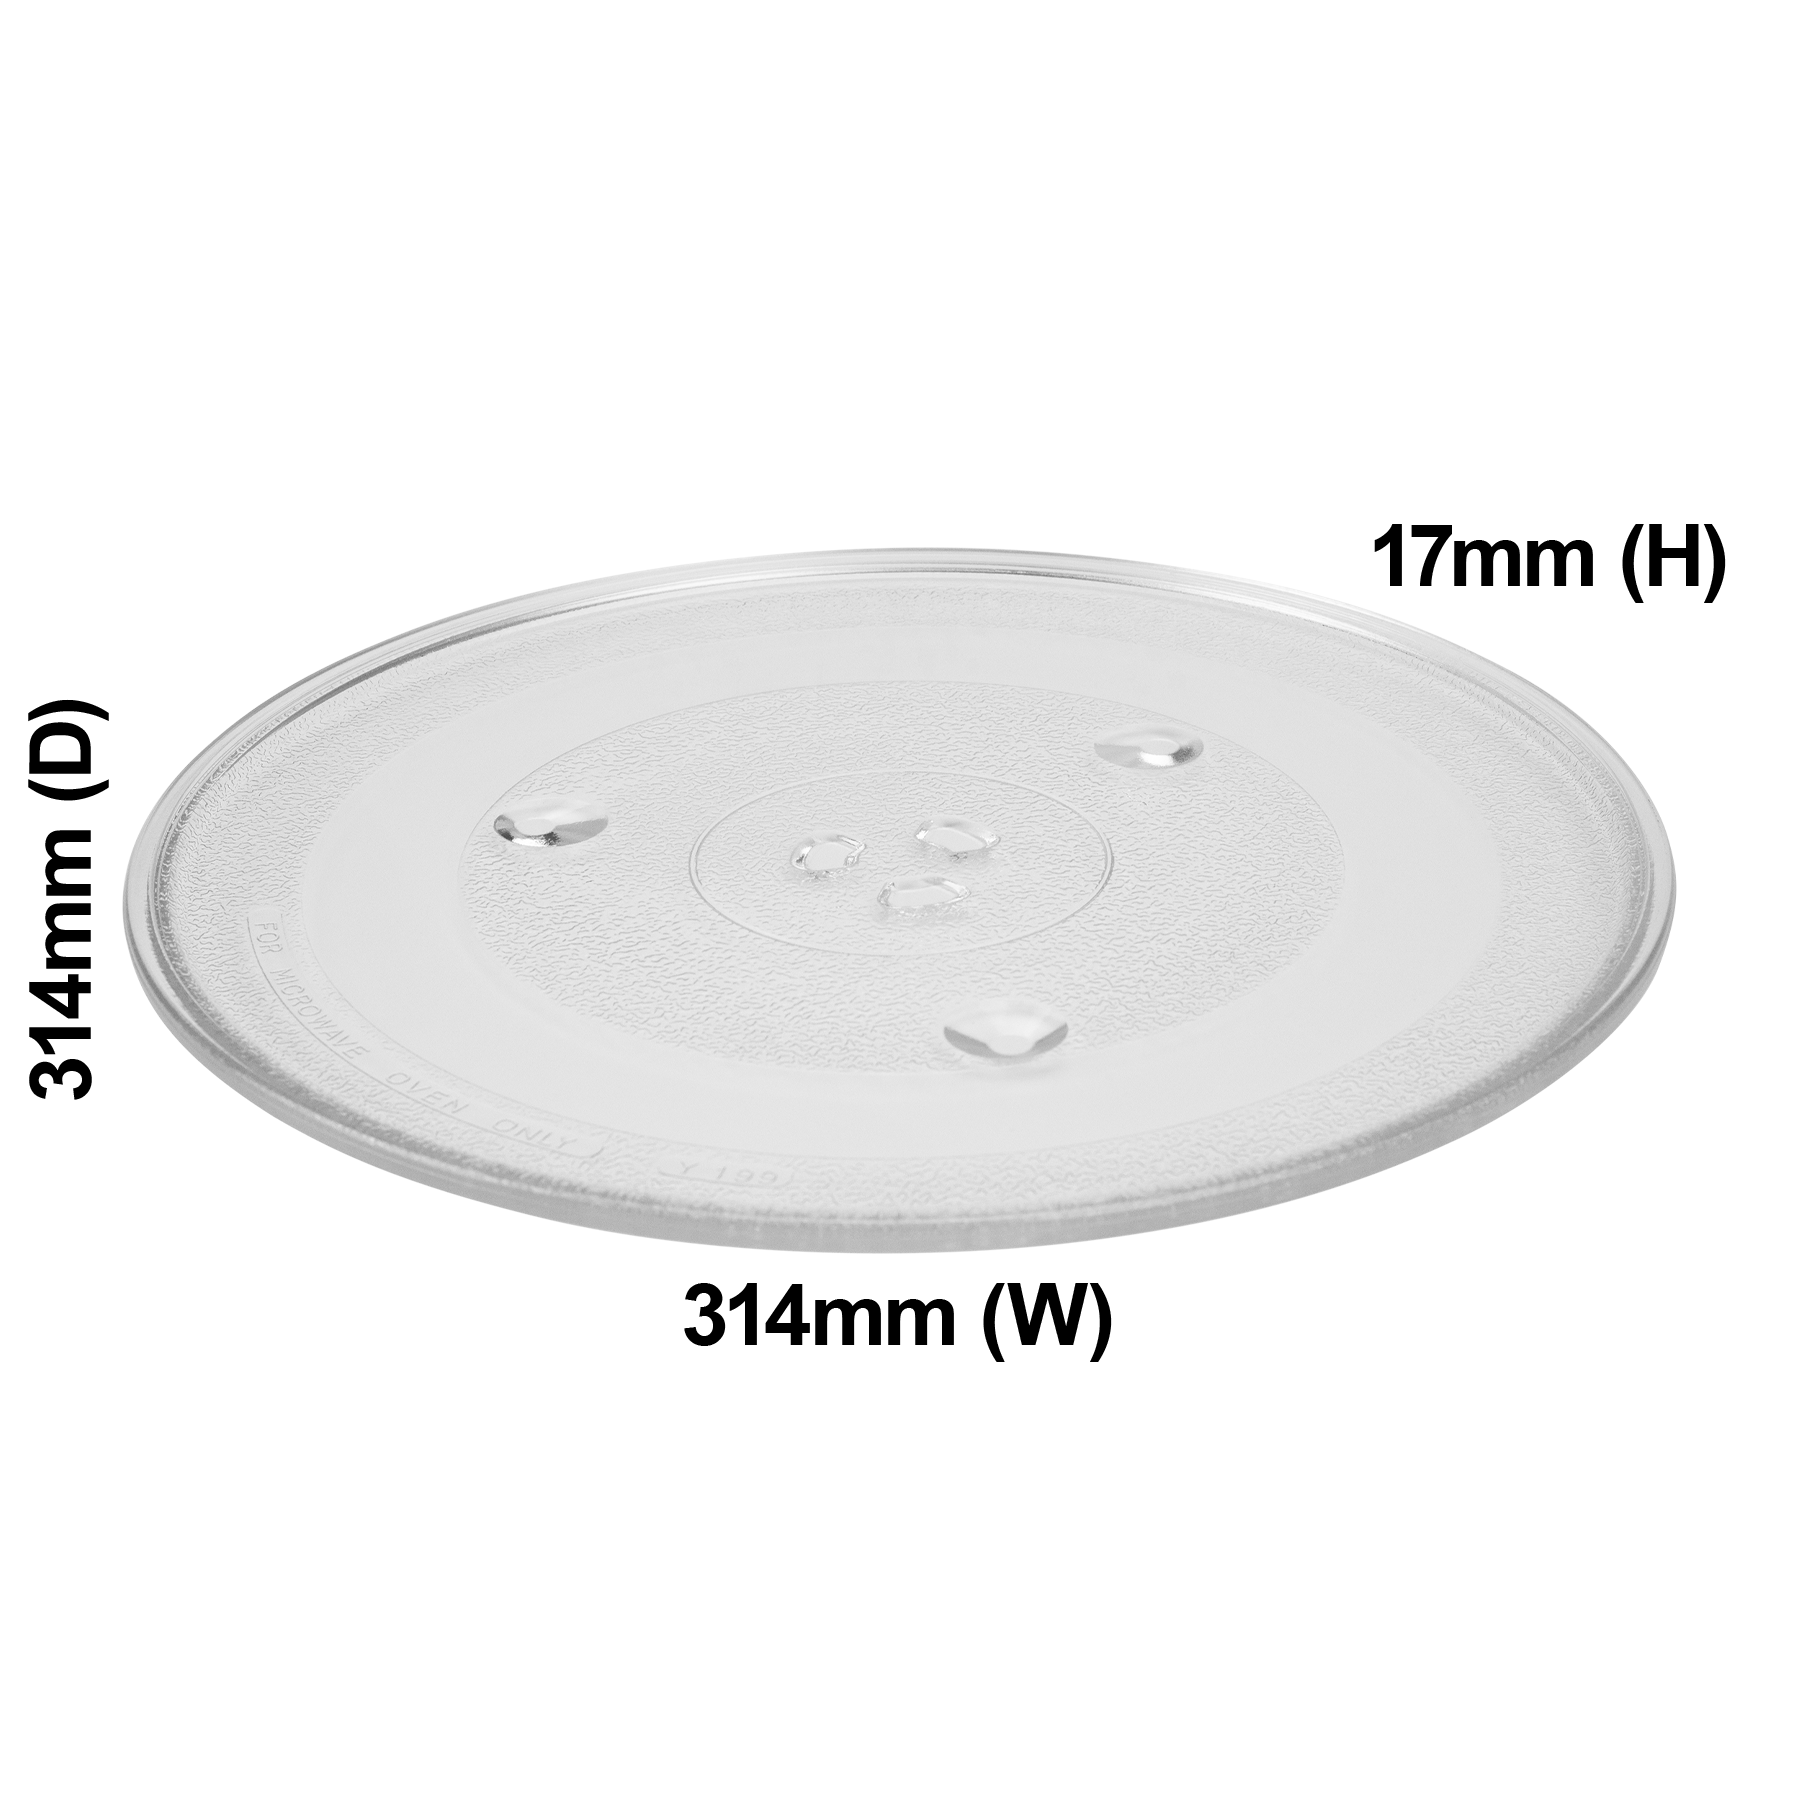 /globalassets/0-spareparts/sku4055559076-plate-glass-turntable-weighs-1.402kg-front.png